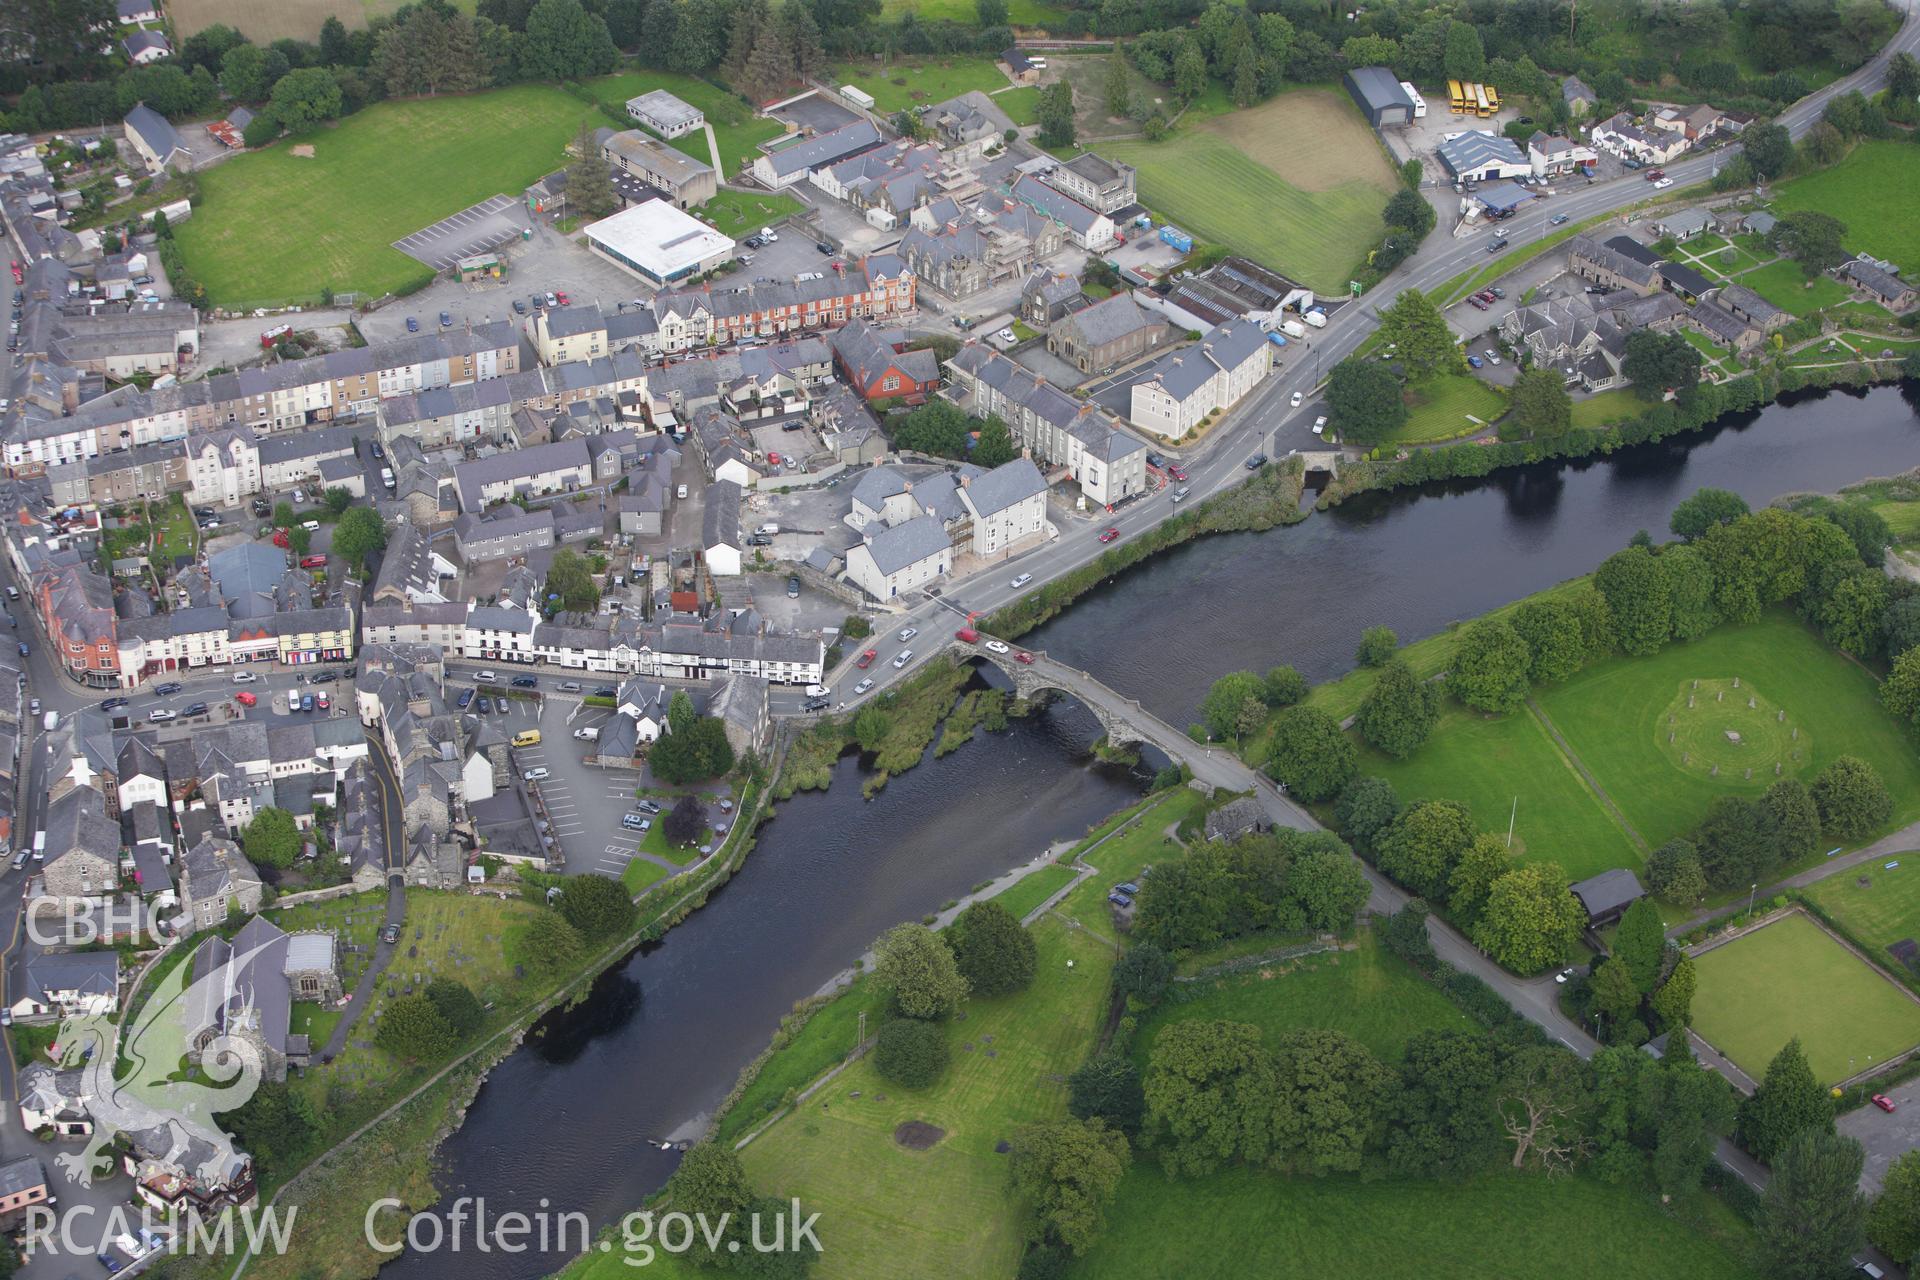 RCAHMW colour oblique aerial photograph of Llanrwst. Taken on 06 August 2009 by Toby Driver